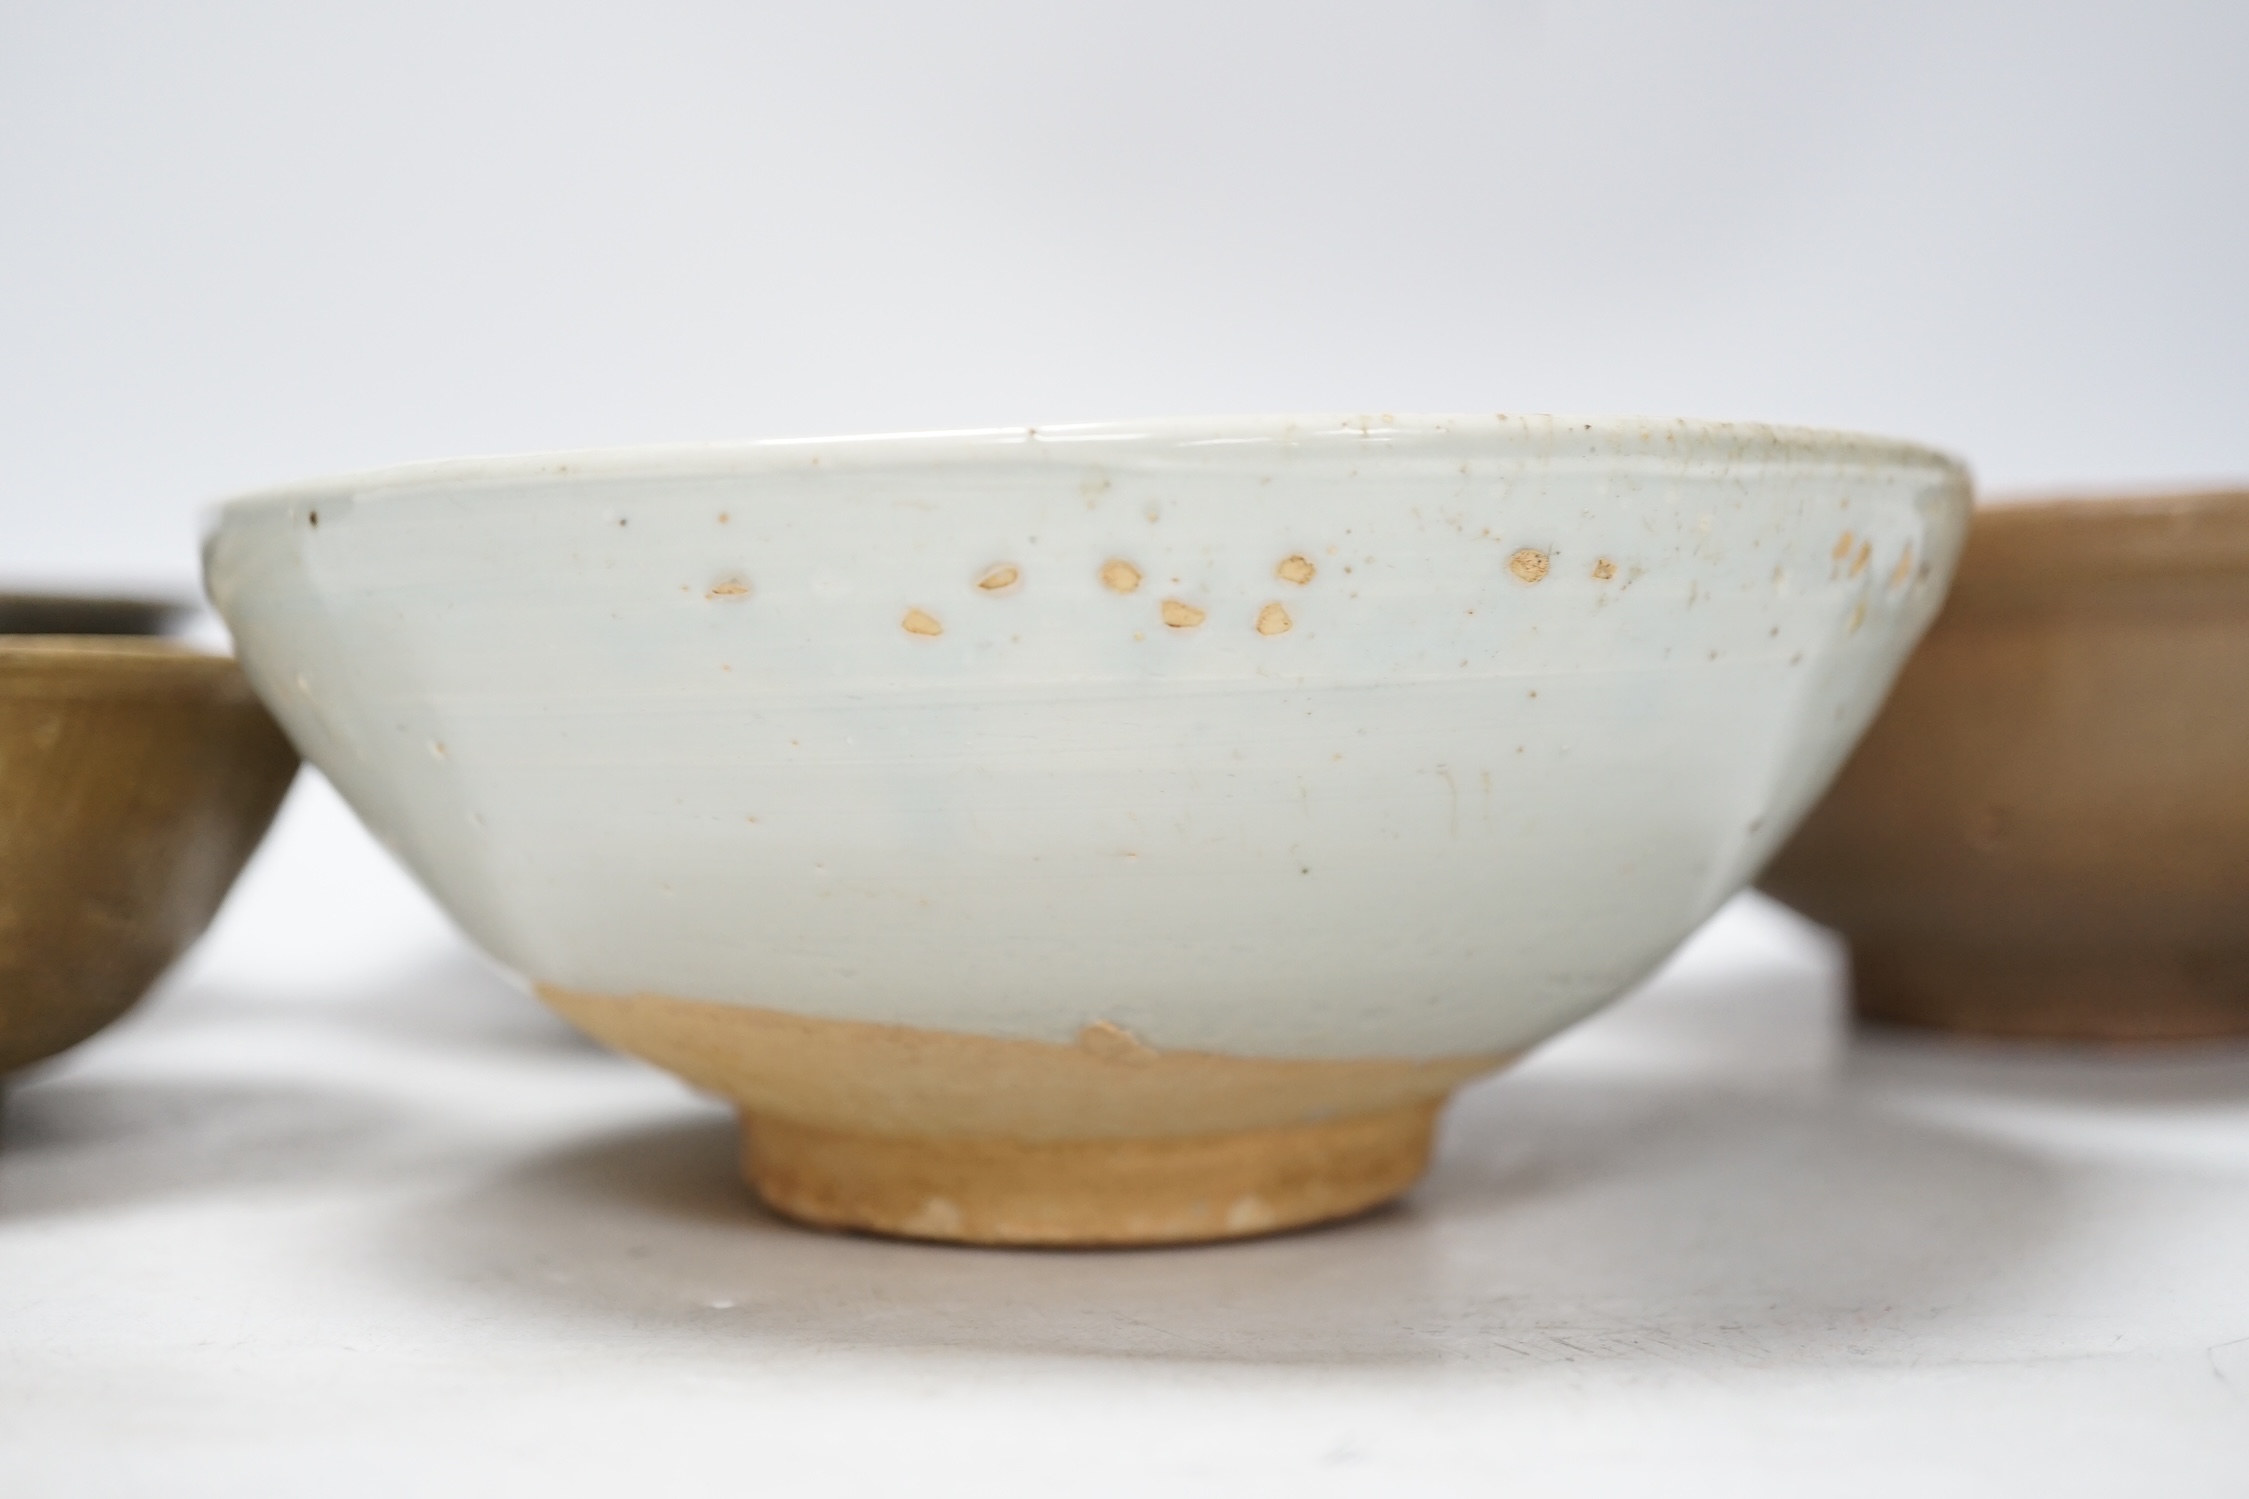 A group of four Chinese Longquan or Yue ware celadon bowls and a Qingbai bowl, Song-Yuan dynasty, largest 20cm diameter (5)